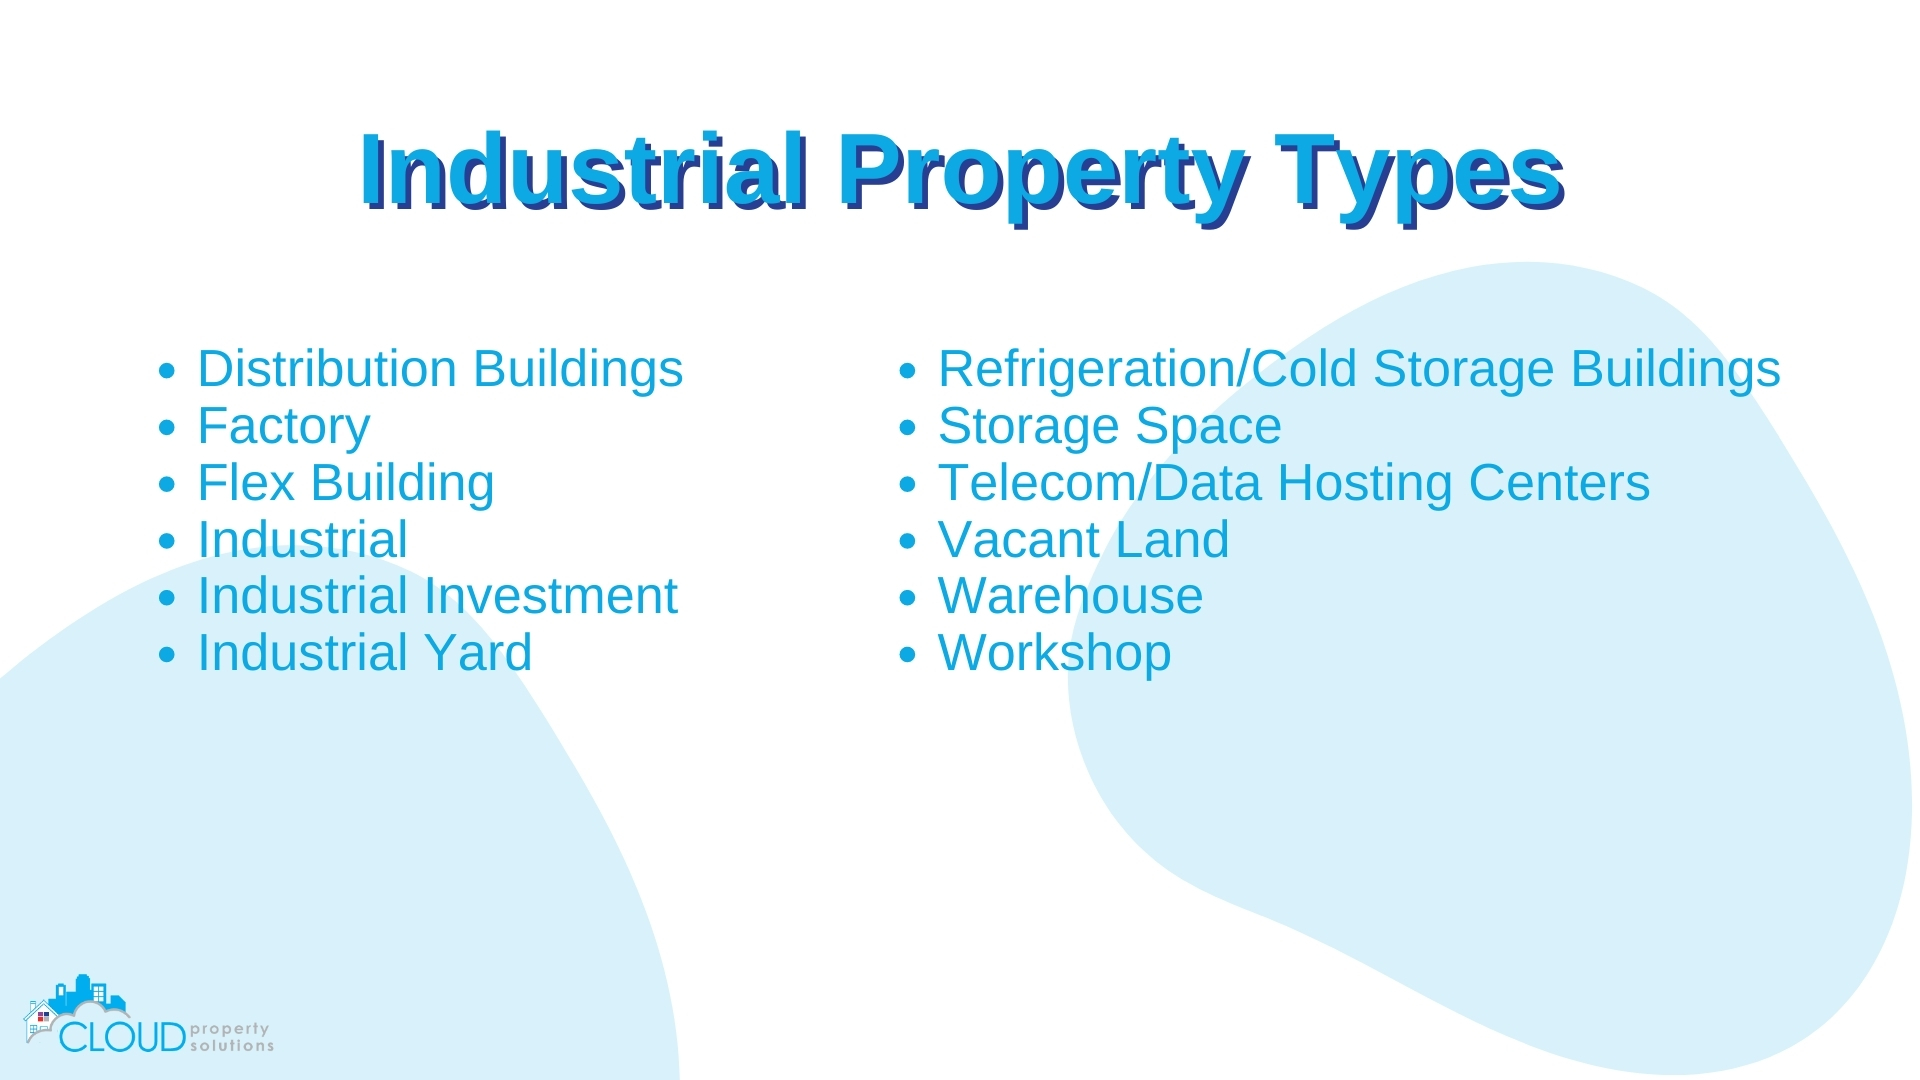 Industrial Property Types